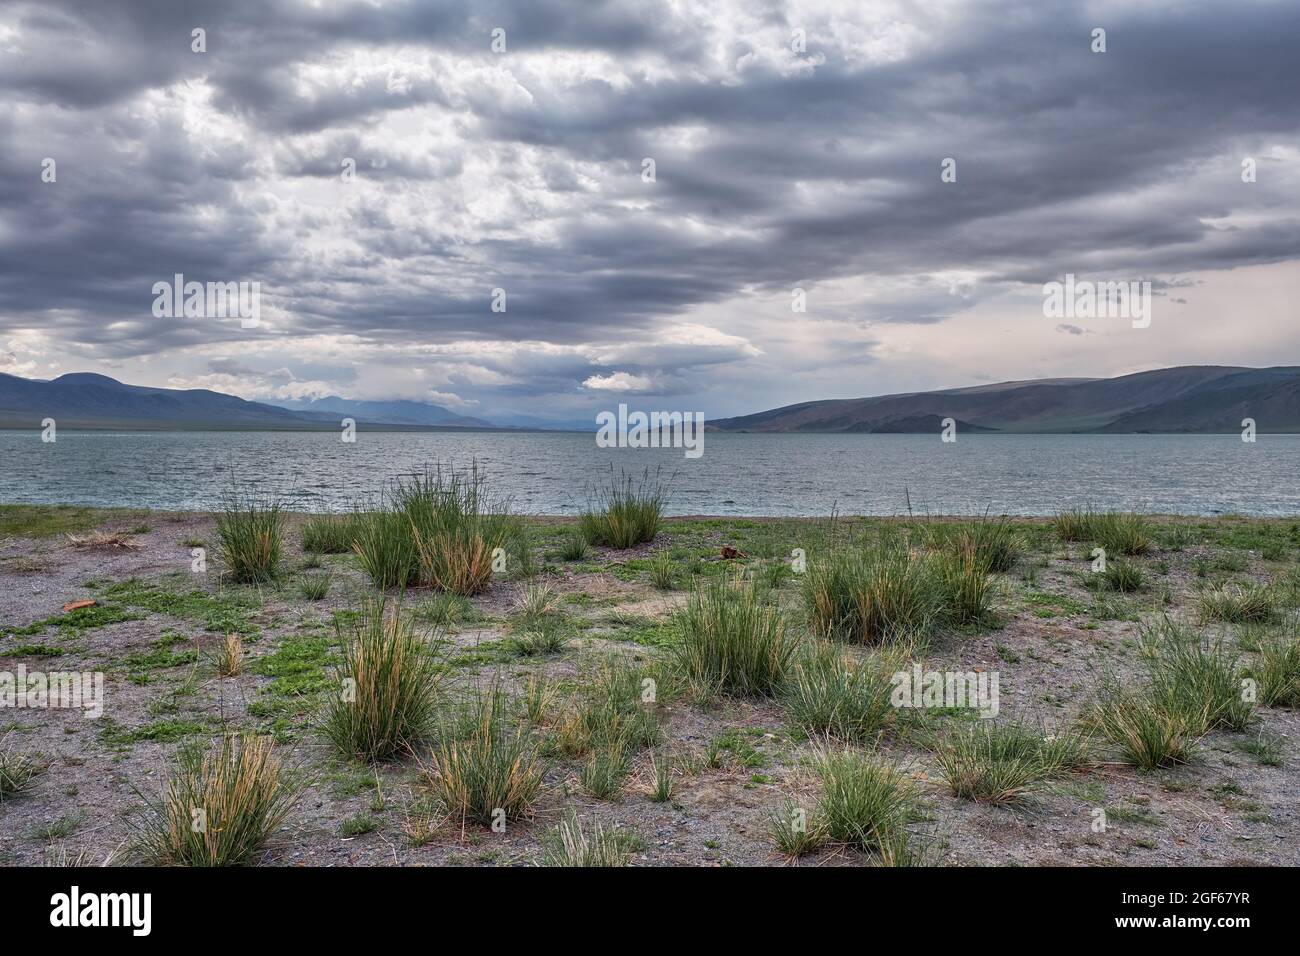 Mongolian natural landscapes with bushes of grass Achnatherum near lake Tolbo-Nuur in north Mongolia. Stock Photo